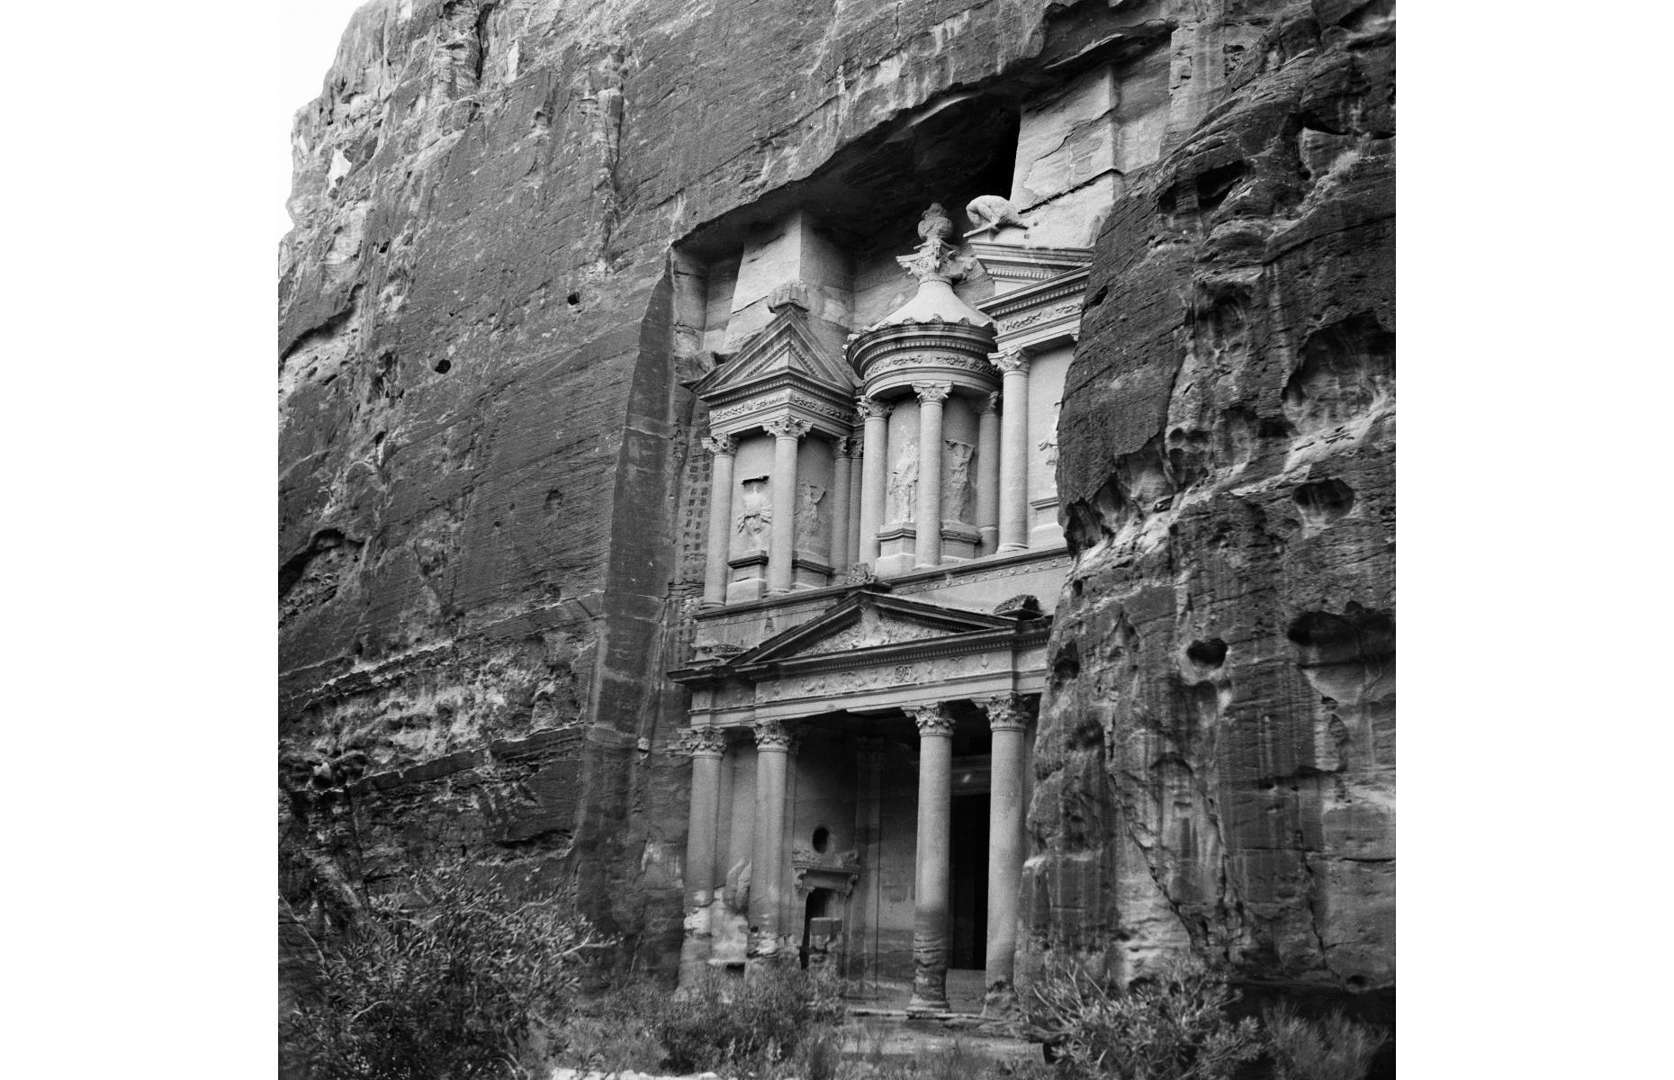 Slide 8 of 41: Hewn from mighty bluffs of red sandstone, the Treasury (or Al-Khazneh) is the greatest wonder left behind in the ancient city of Petra. The city is thought to have thrived from around 400 BC and experts believe that the elaborate Treasury served as a royal mausoleum. Europeans tracked down the incredible ruins in the early 1800s and the site gradually established itself as a tourist destination. This close-up shot taken circa 1900 shows off the Treasury's stunning columns and carvings.